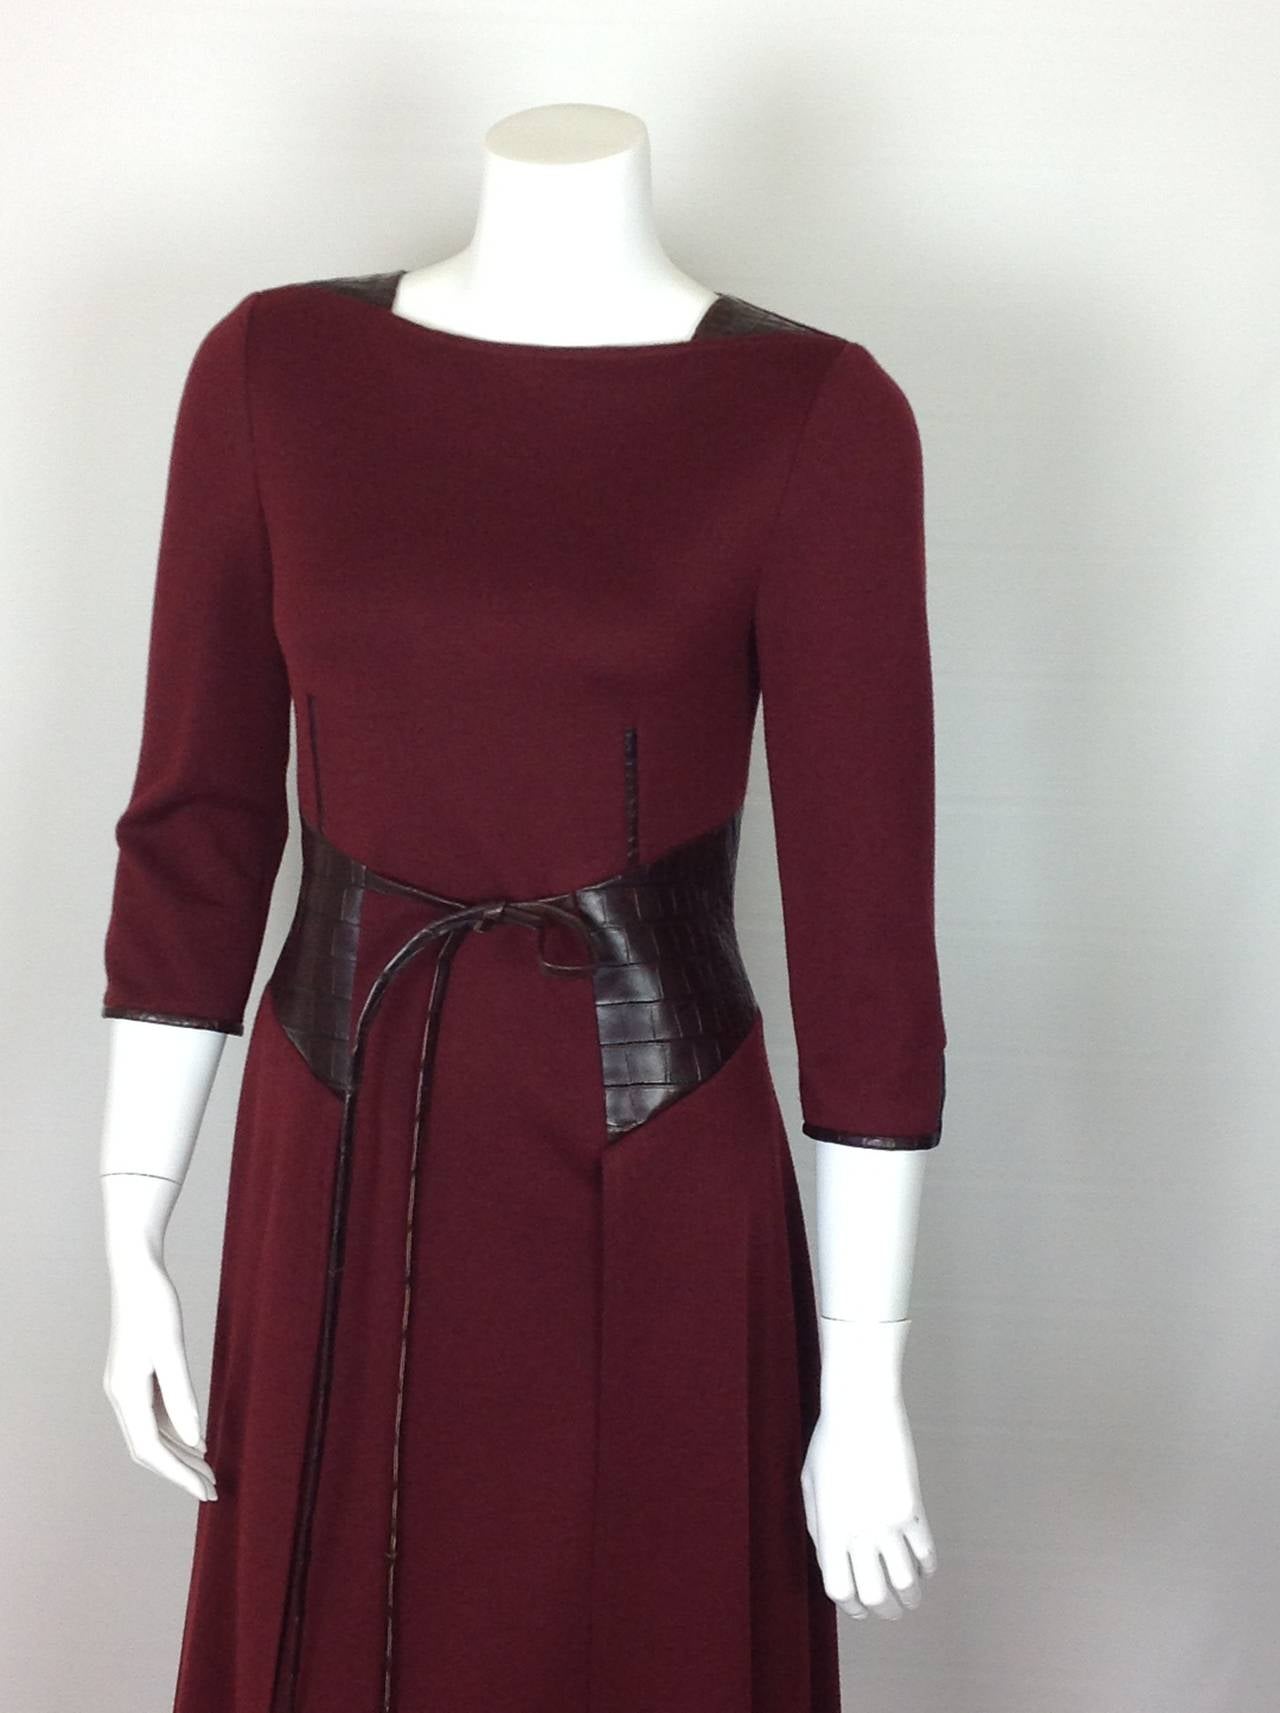 From the Fall 2014 collection, a Ralph Rucci serious business dress.  
Beautiful burgundy knit wool dress with 3/4 sleeves. Skirt overlay. 
Soft leather, printed to look like alligator, corset effect at waist, trims the sleeves, gussets at the